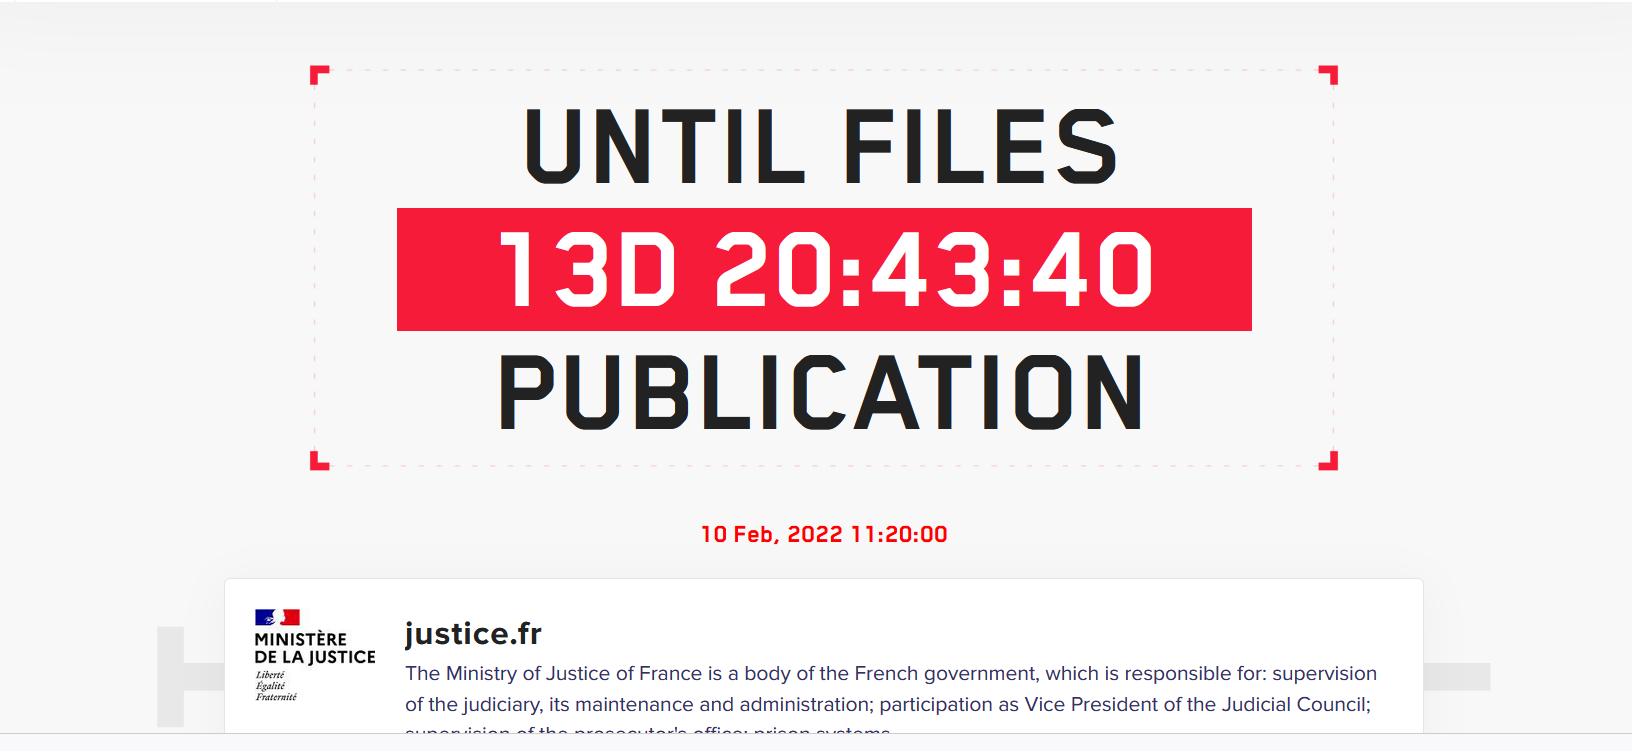 Lockbit ransomware gang claims to have hacked Ministry of Justice of France